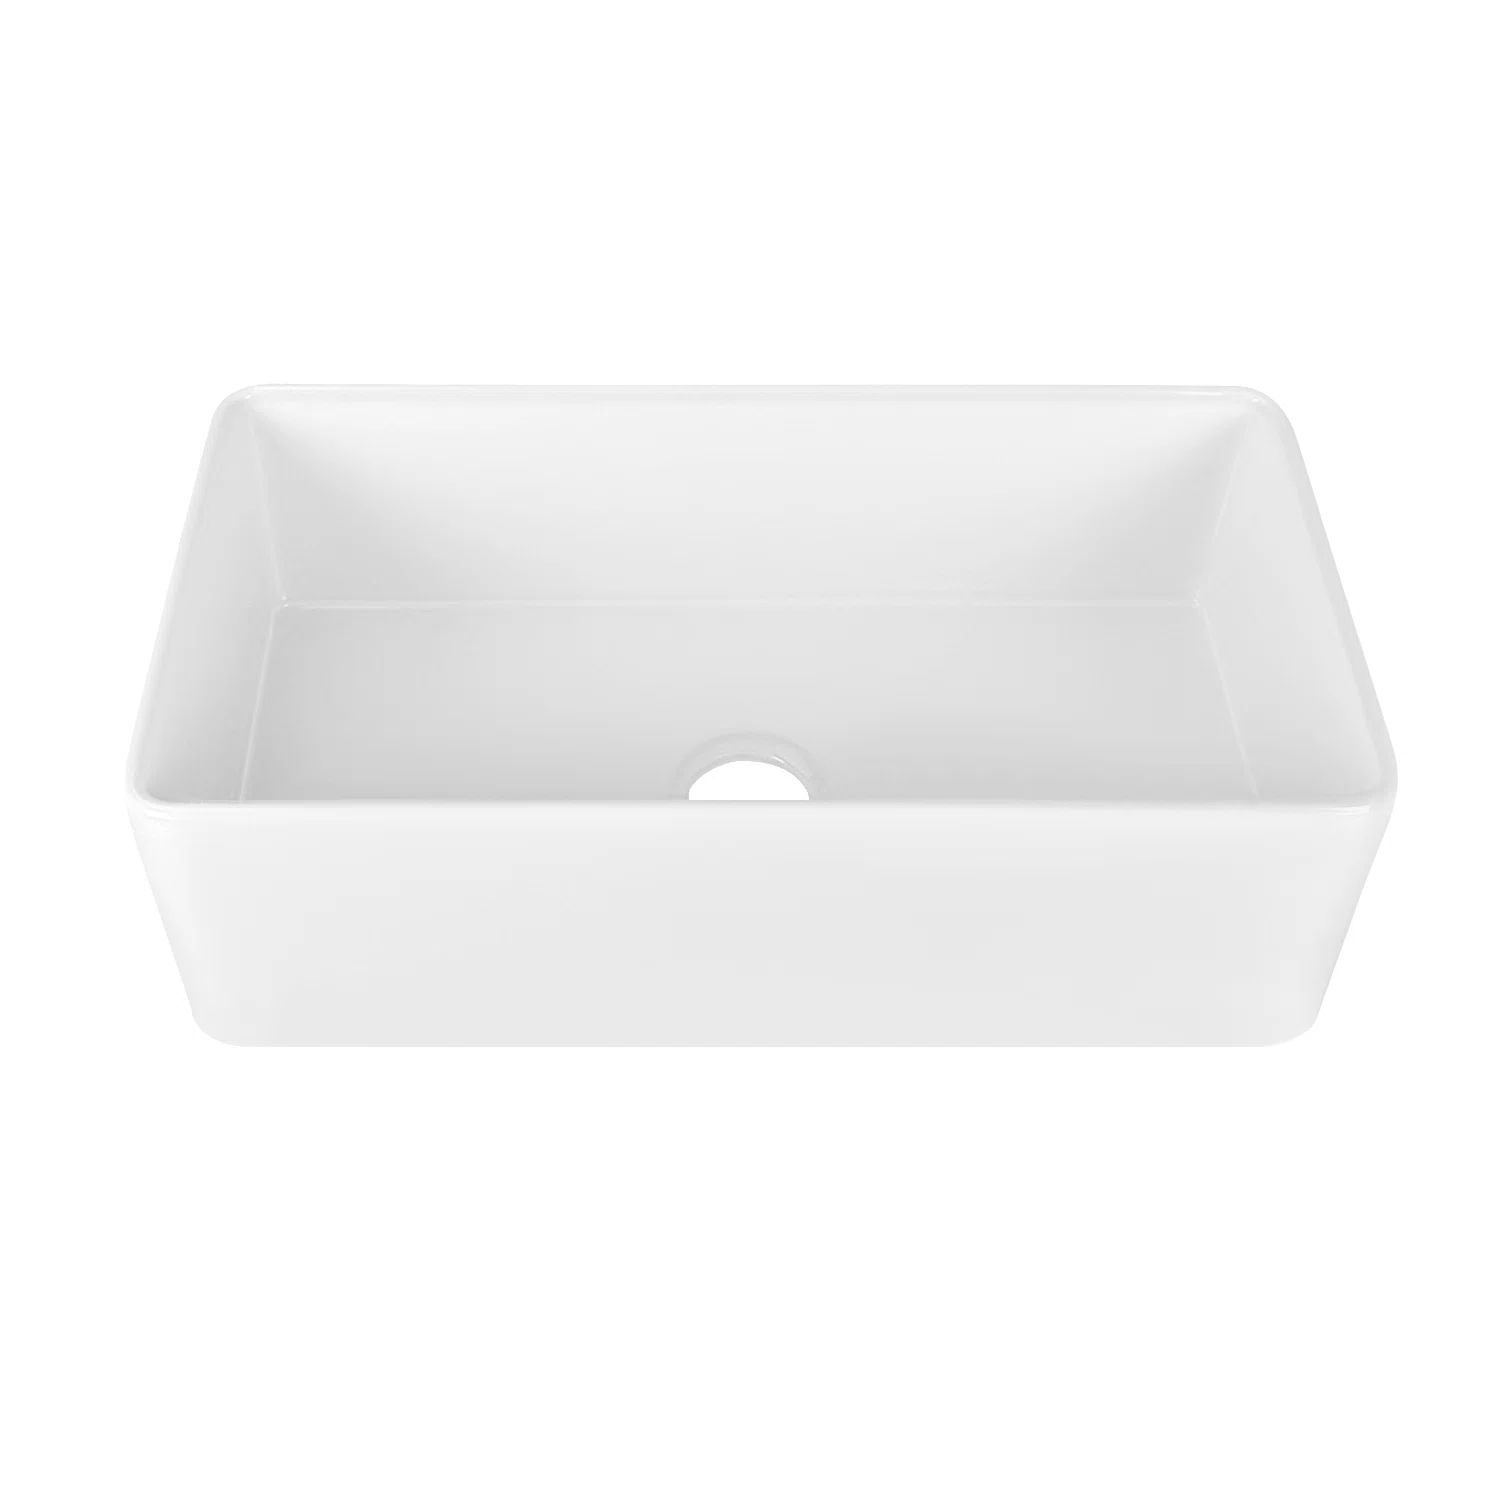 Grove Fireclay Farmhouse Kitchen Sink with Sink Grid and Basket Strainer | Wayfair North America